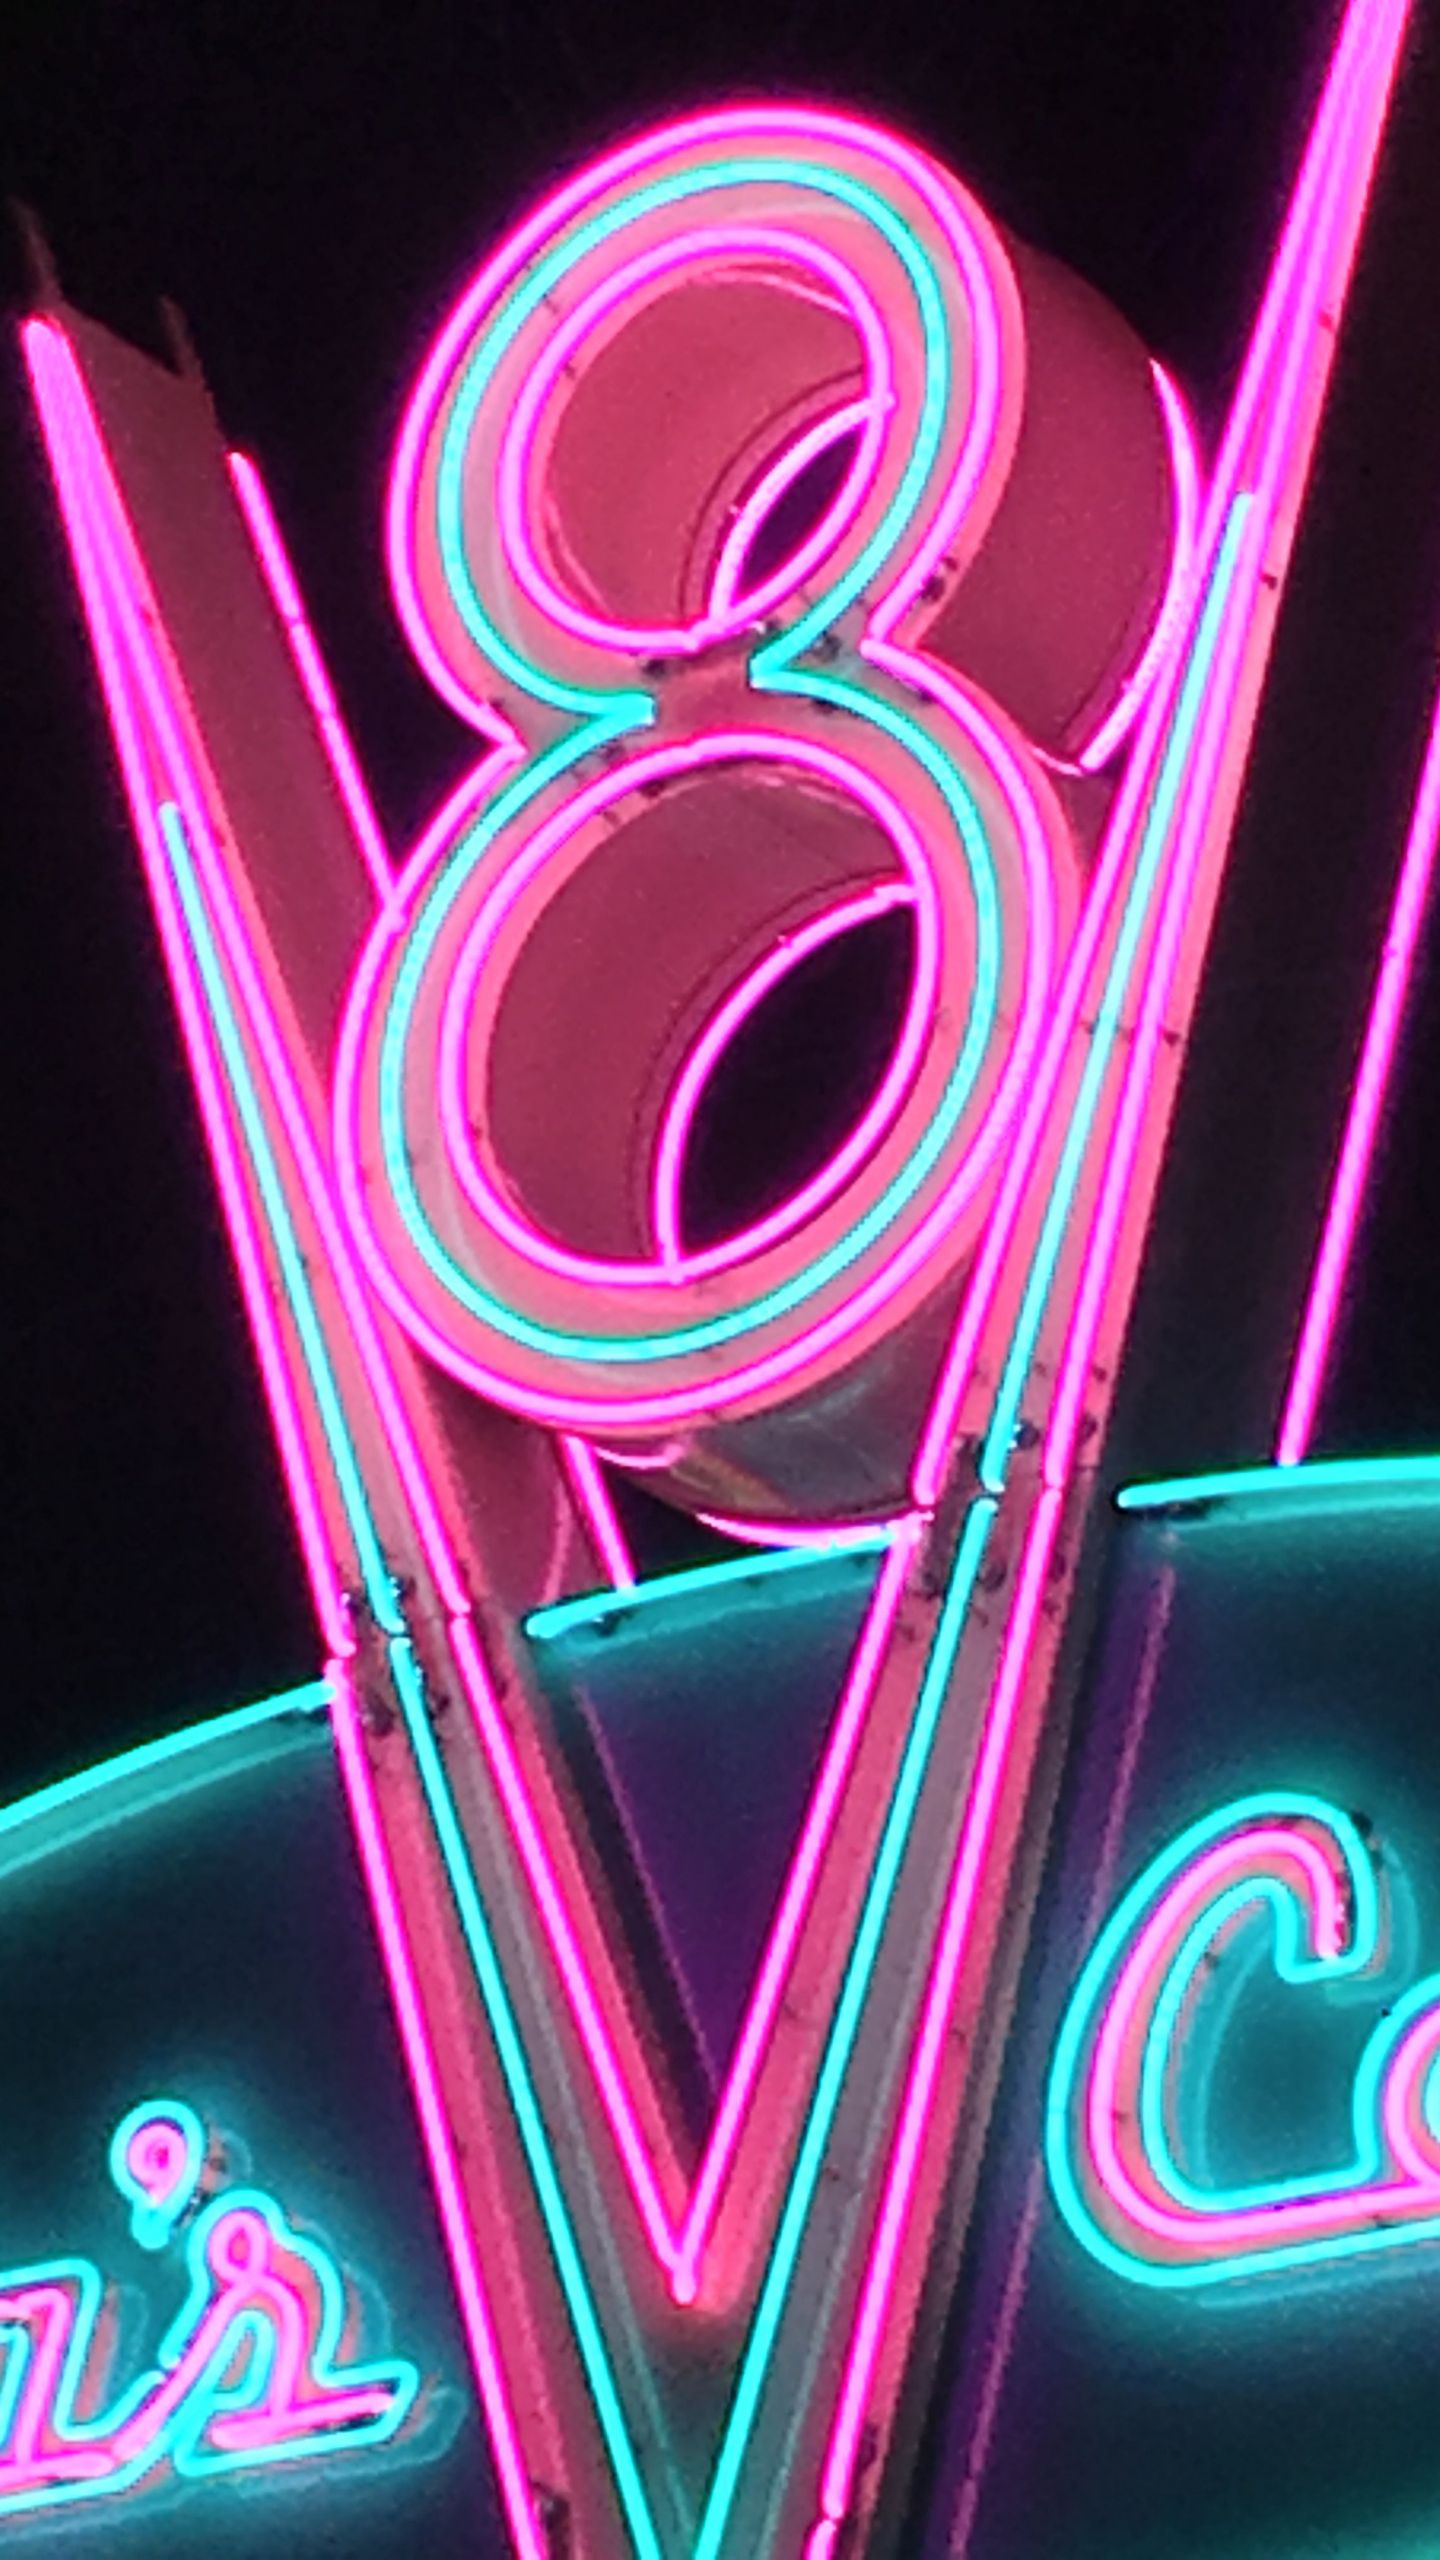 1440x2560 Free Download Best Classic Neon Sign With Retro Style Wallpaper 8 Image 3024x4032 For Your Desktop Mobile Tablet Explore Neon Aesthetic Wallpaper Neon Aesthetic Wallpaper Aesthetic Wallpaper Aesthetic Wallpaper